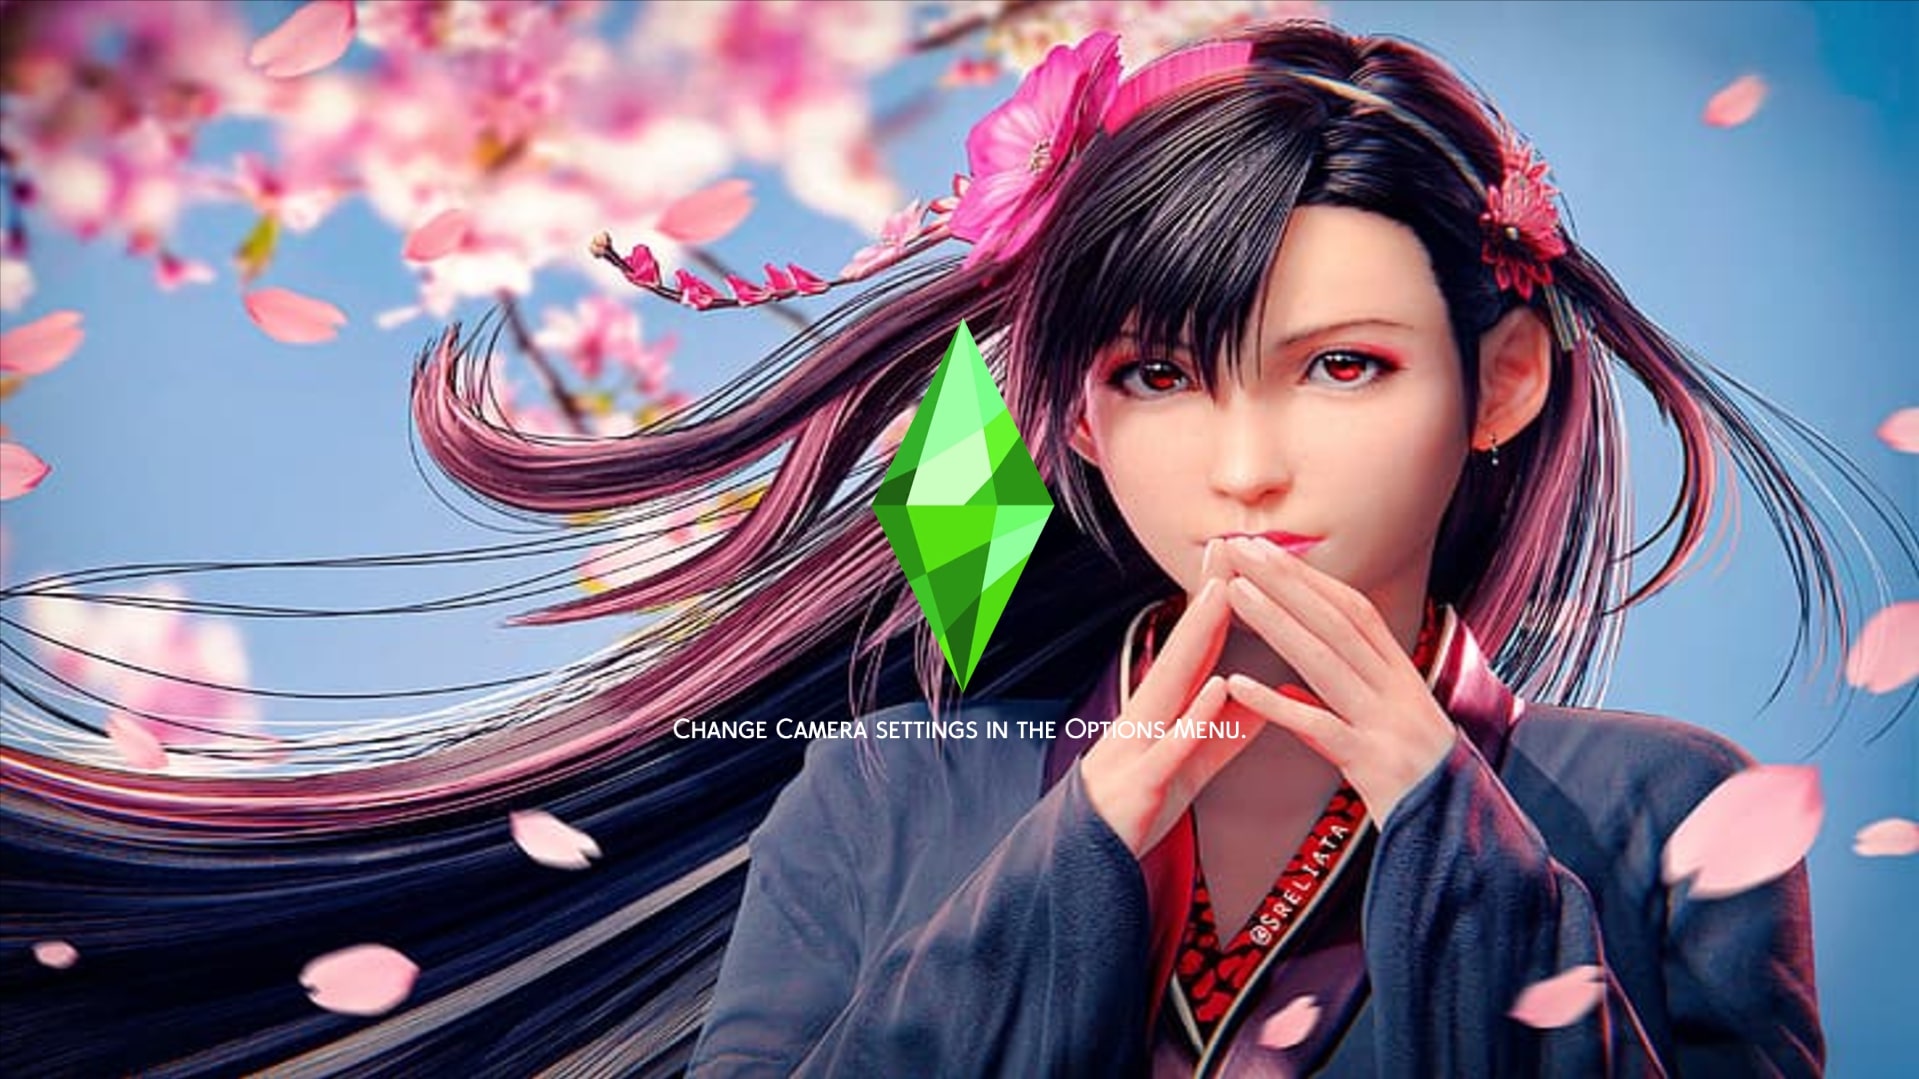 Anime Loading Screens - The Sims 4 Mods - CurseForge